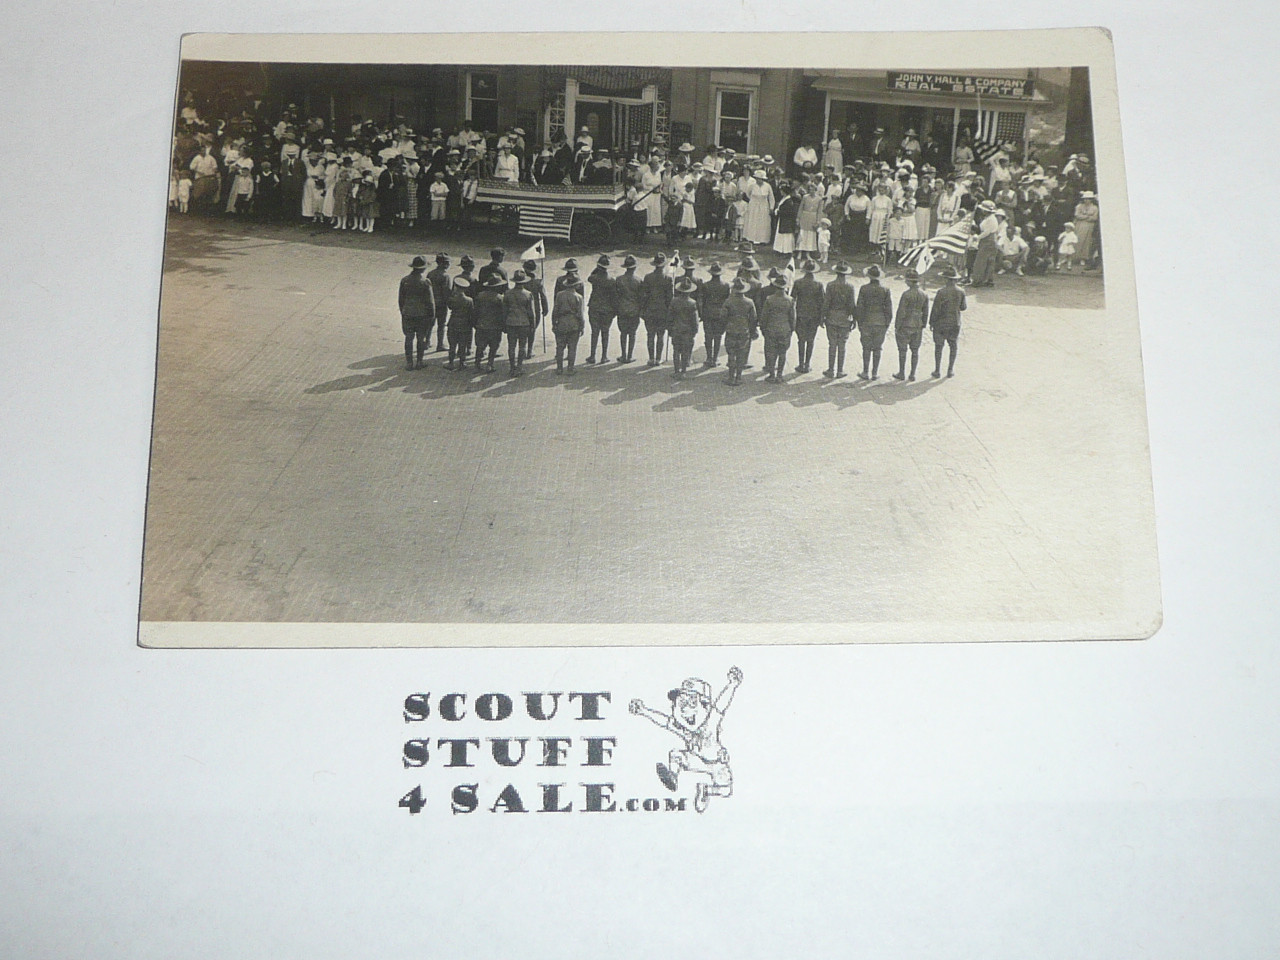 Teens Photo Postcard of a group of Boy Scouts in front of a Bank